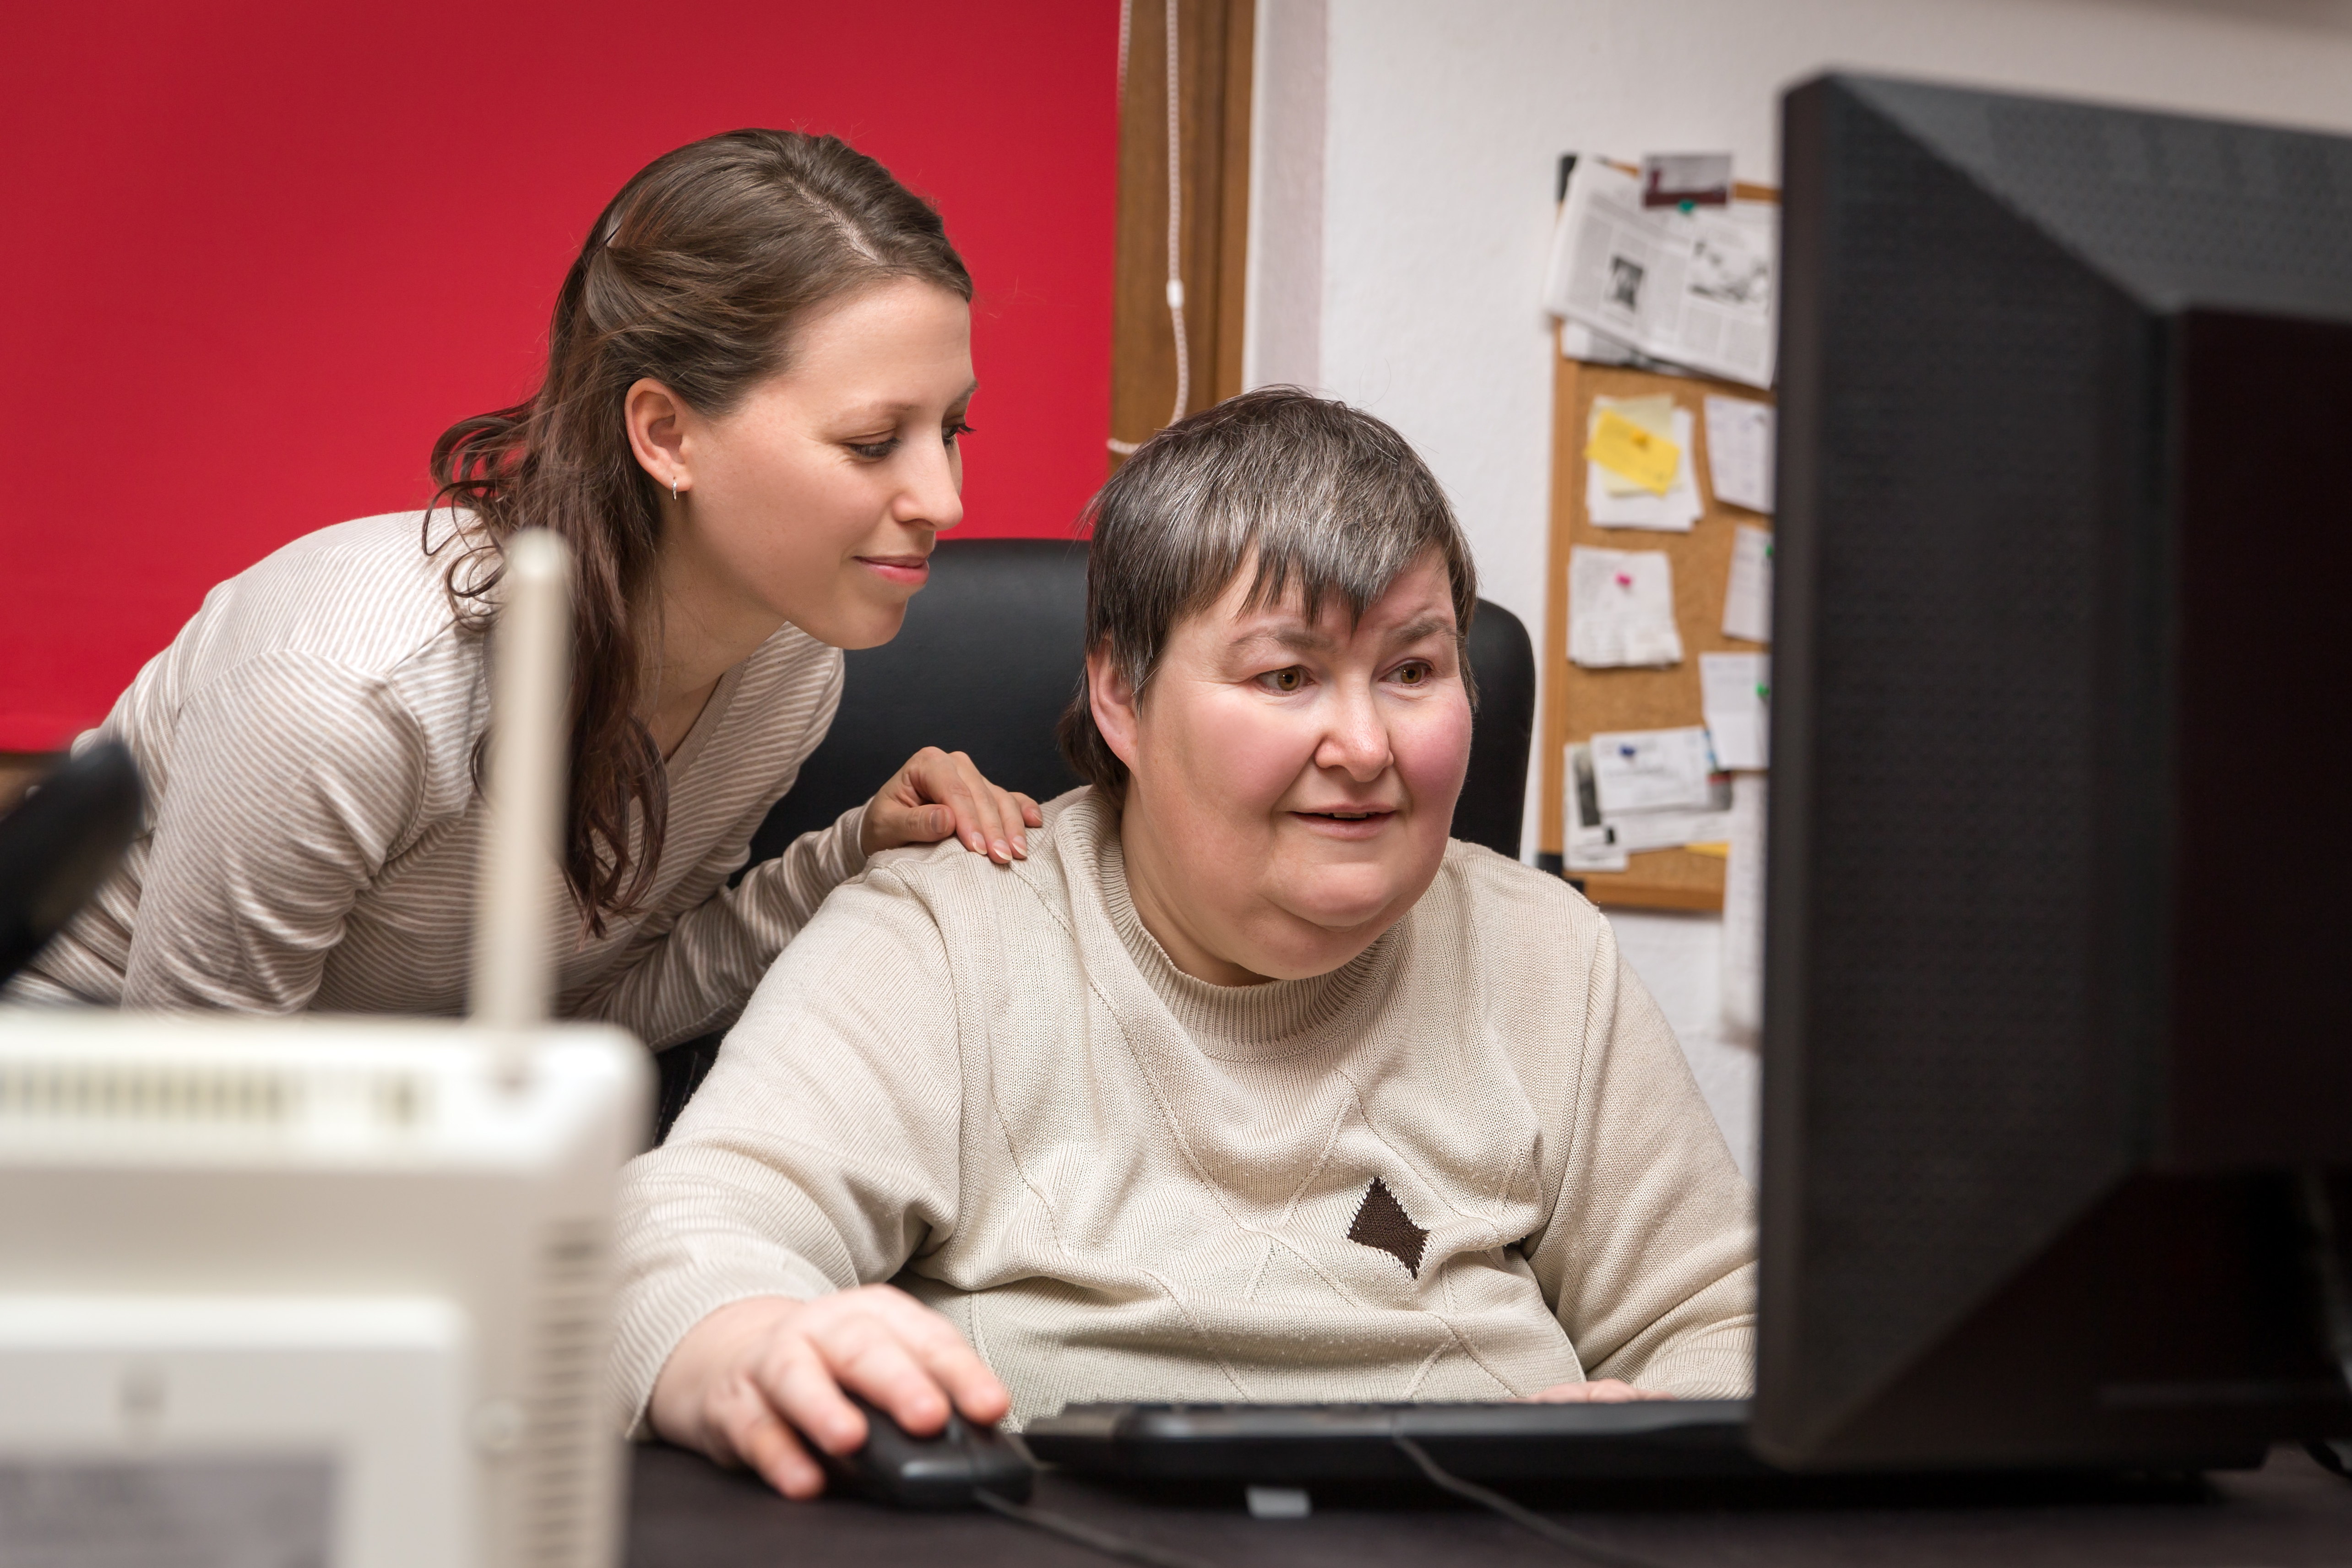 Learning Disability and Autism Services